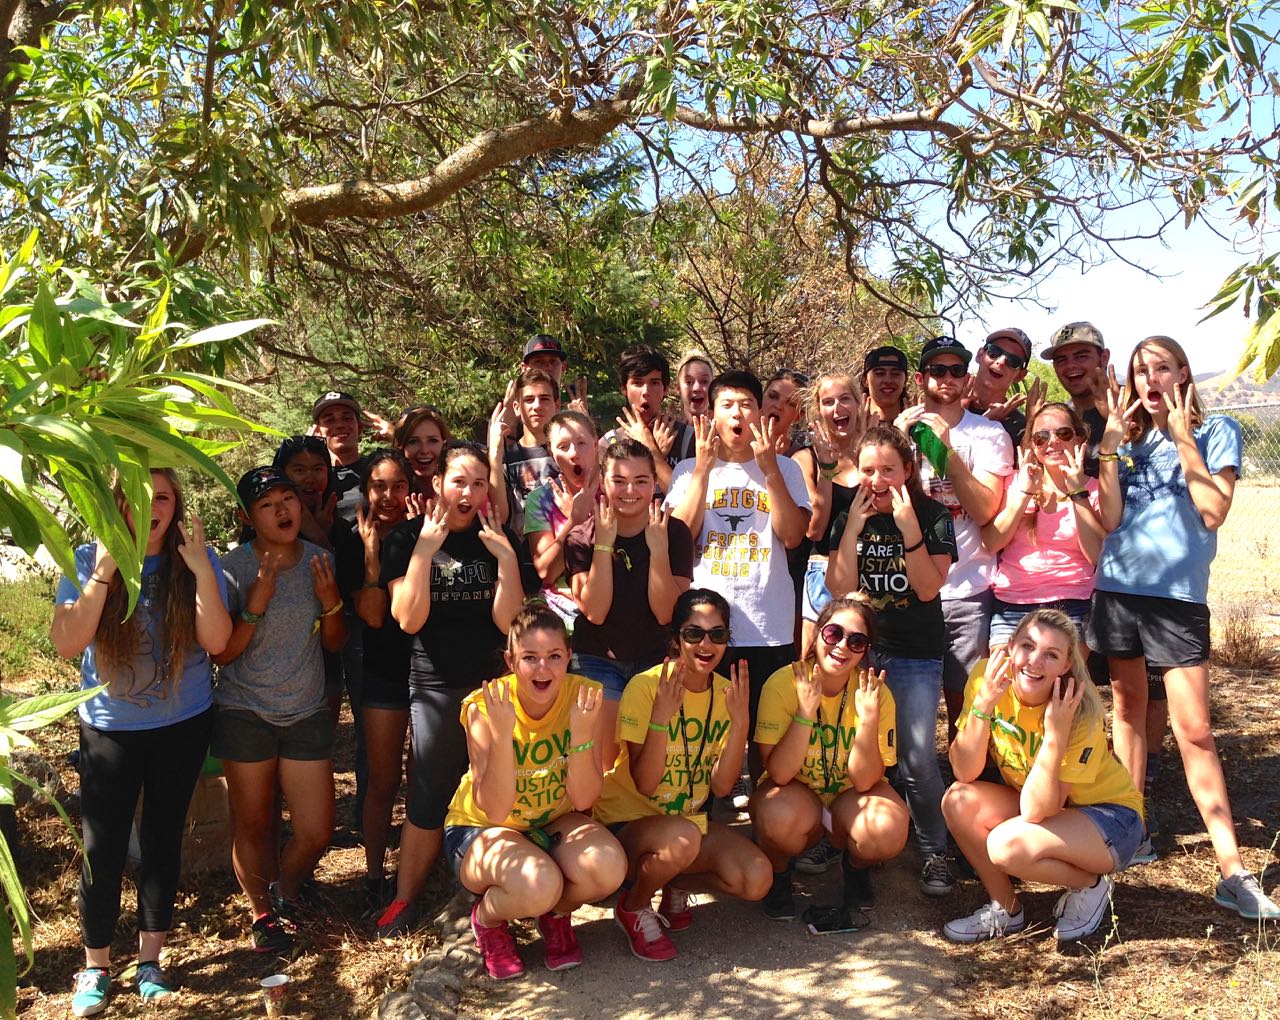 Hats off to Cal Poly WOW groups!